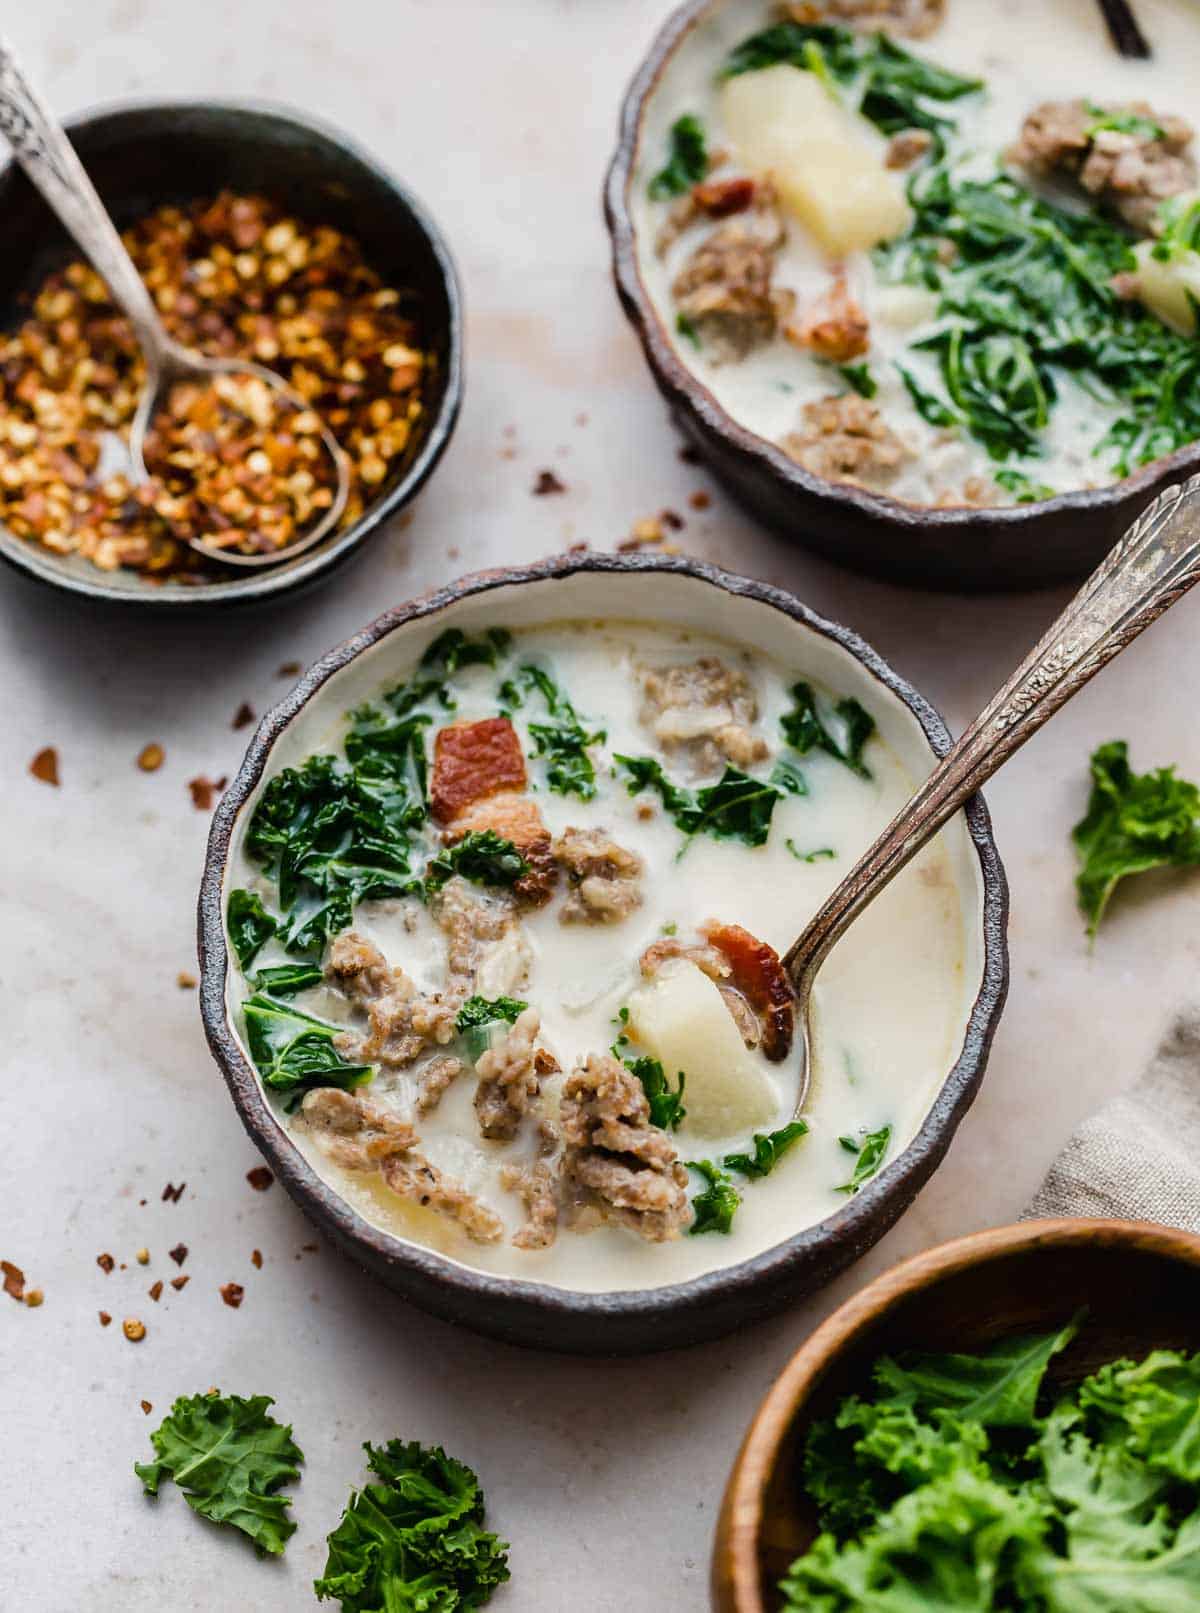 Olive Garden Zuppa Toscana Soup recipe in a black rimmed bowl on a cream textured background with a black bowl filled with crushed red pepper flakes in the background.